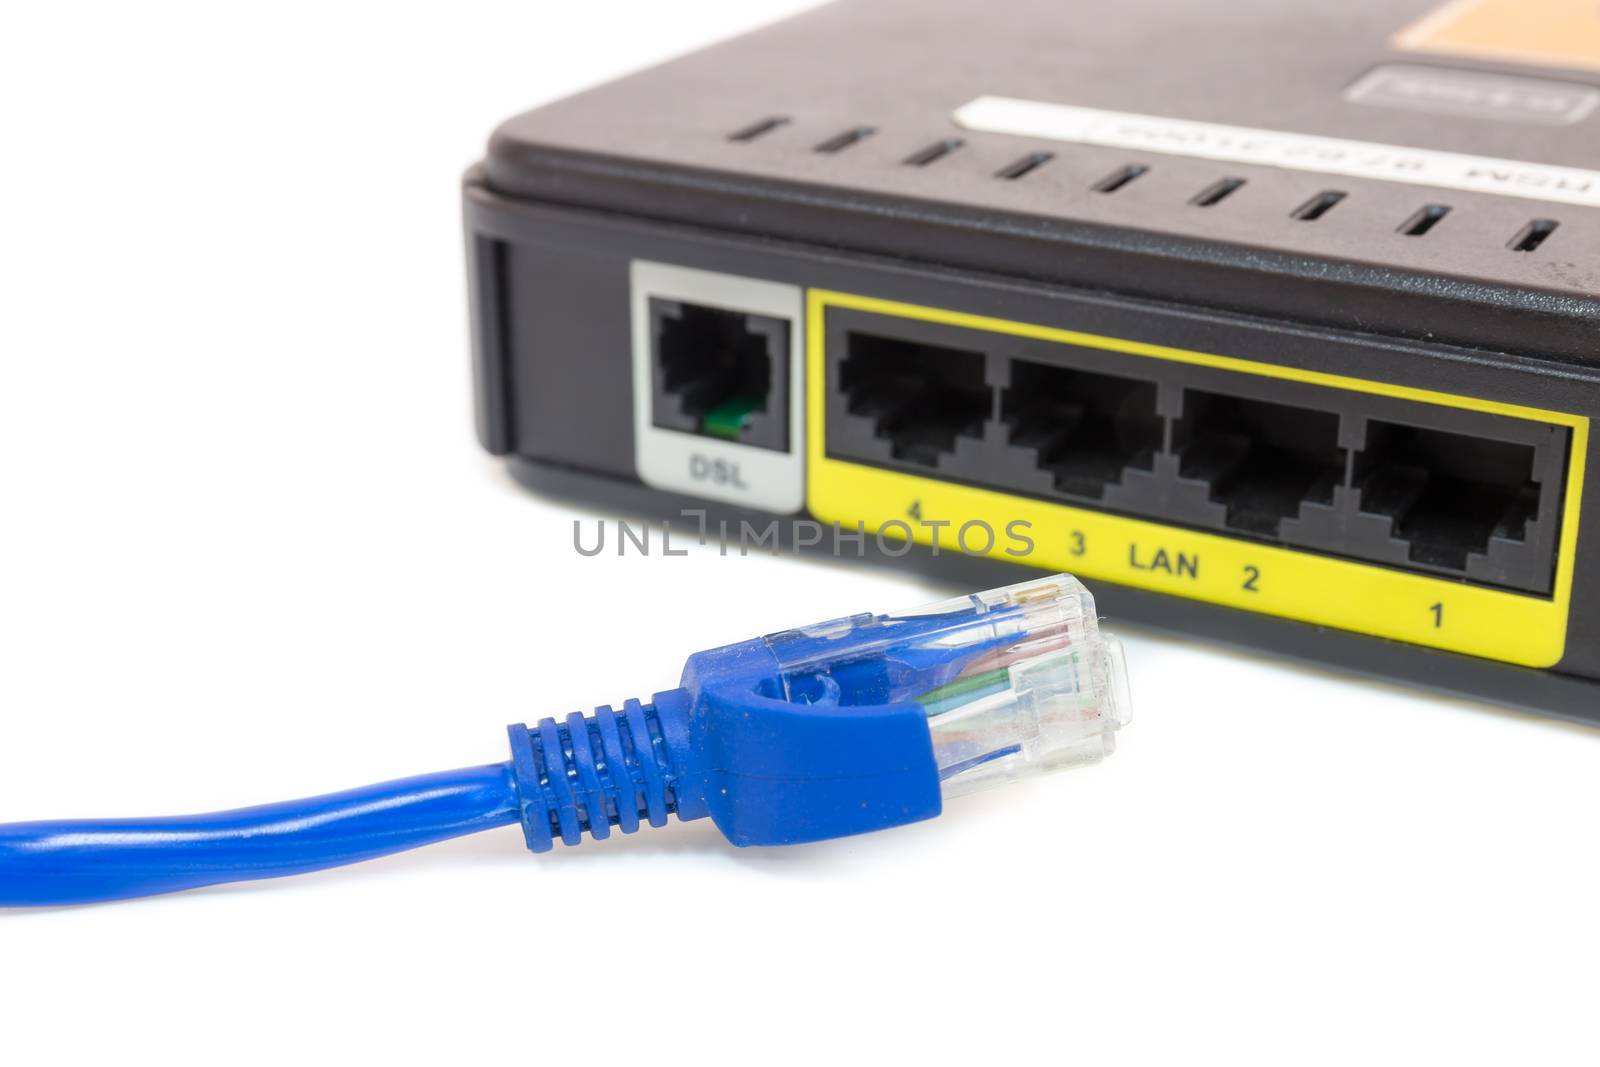 Close up LAN UTP RJ45 Cat5e In front of ADSL Router network switch